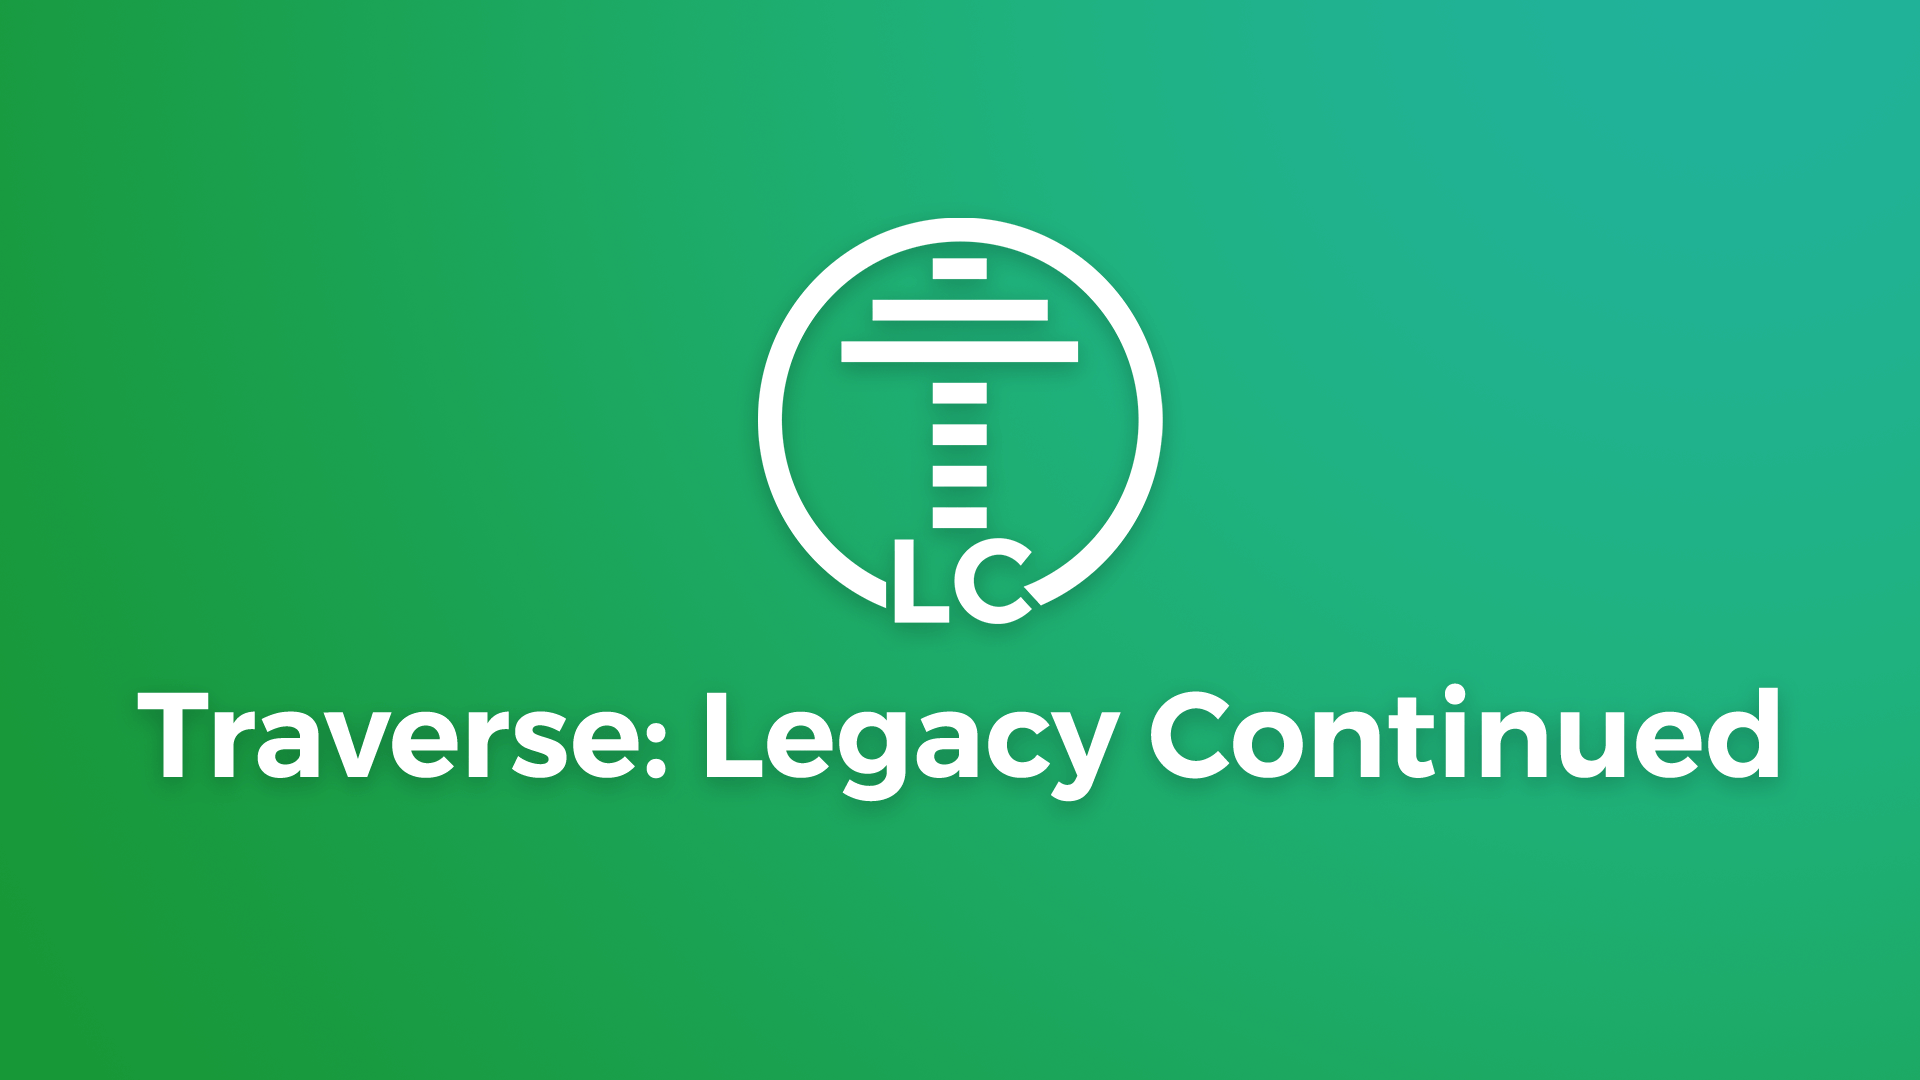 Traverse Legacy continued.